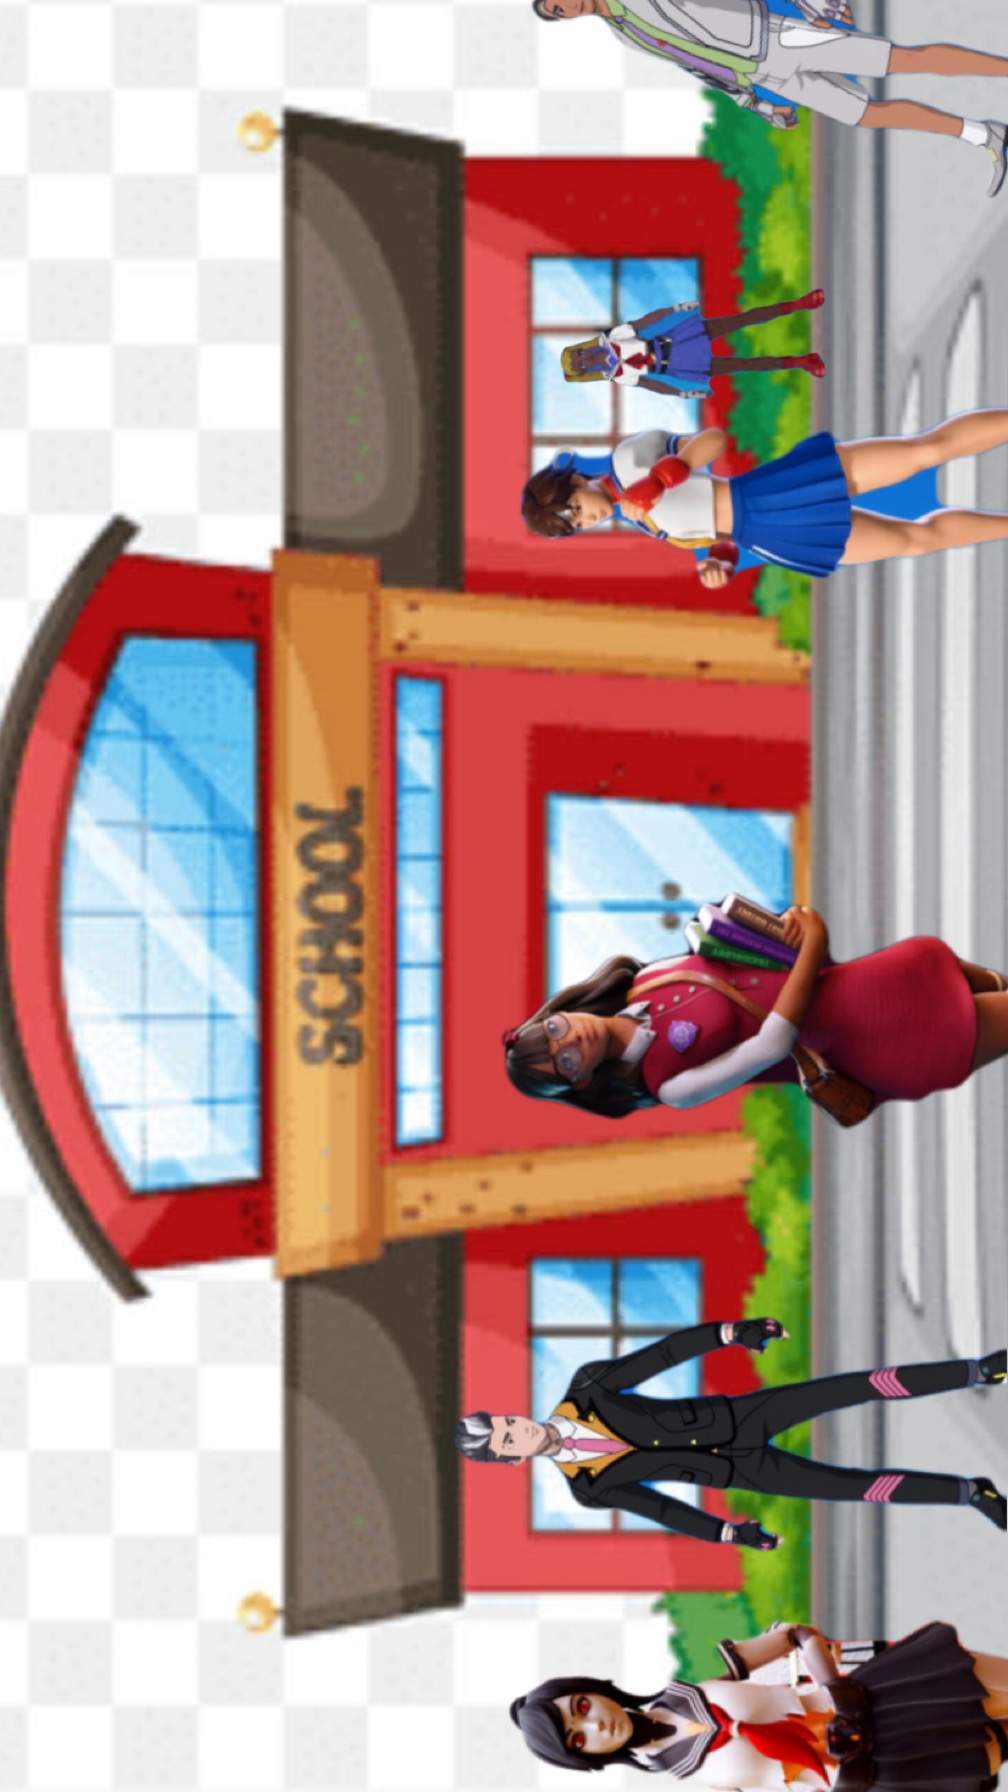 FORTHEIGHT ACADEMY (School royale) image 2